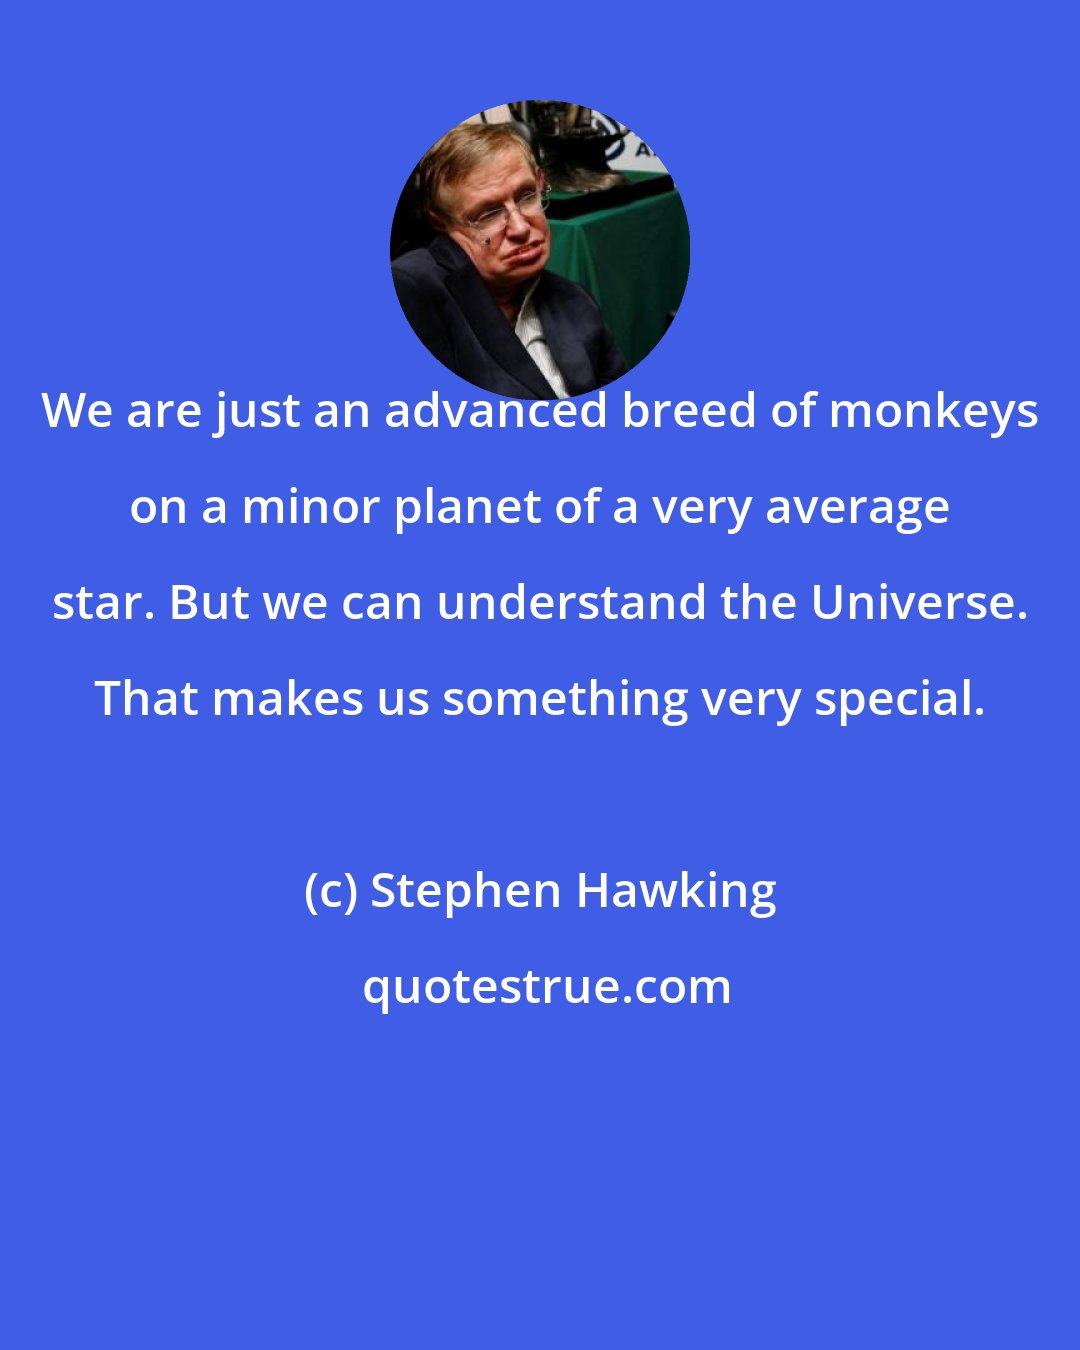 Stephen Hawking: We are just an advanced breed of monkeys on a minor planet of a very average star. But we can understand the Universe. That makes us something very special.